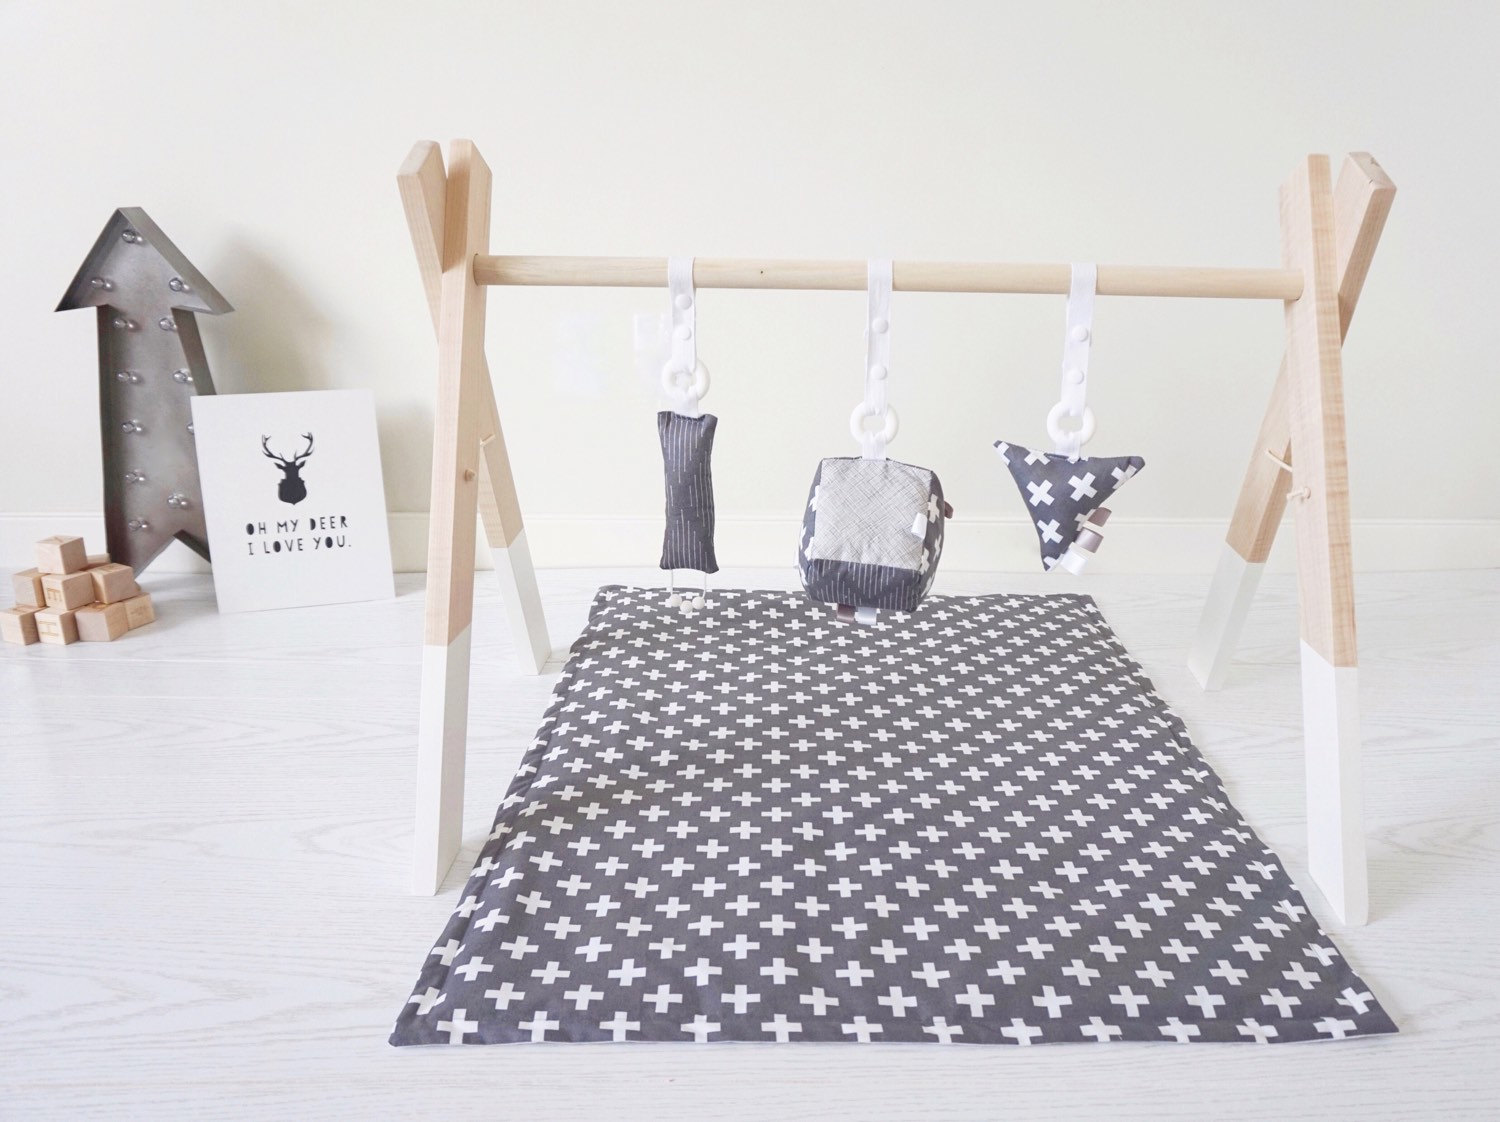 Wooden baby gym from August Lace Designs